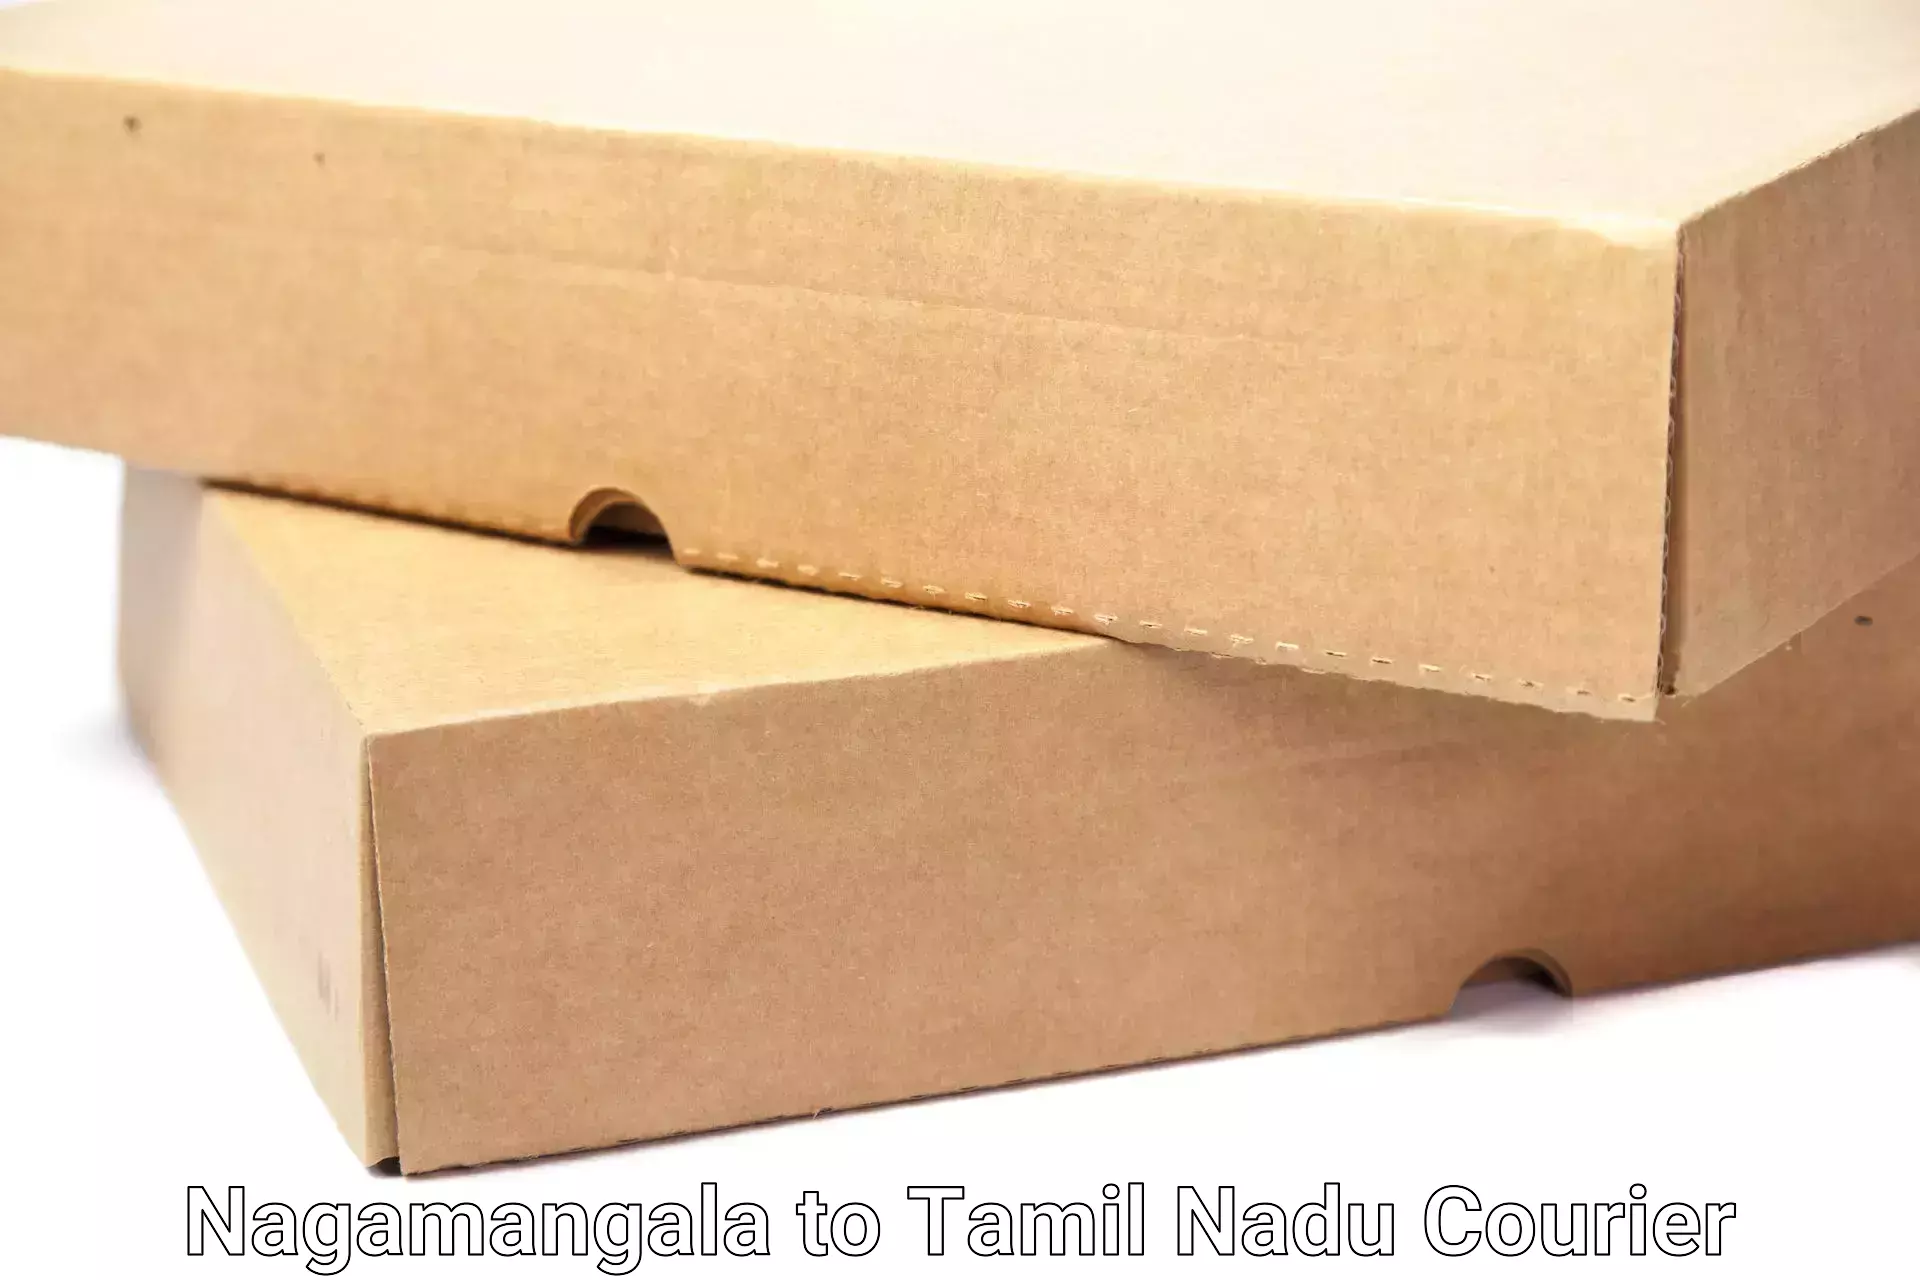 Quality relocation assistance in Nagamangala to Karur